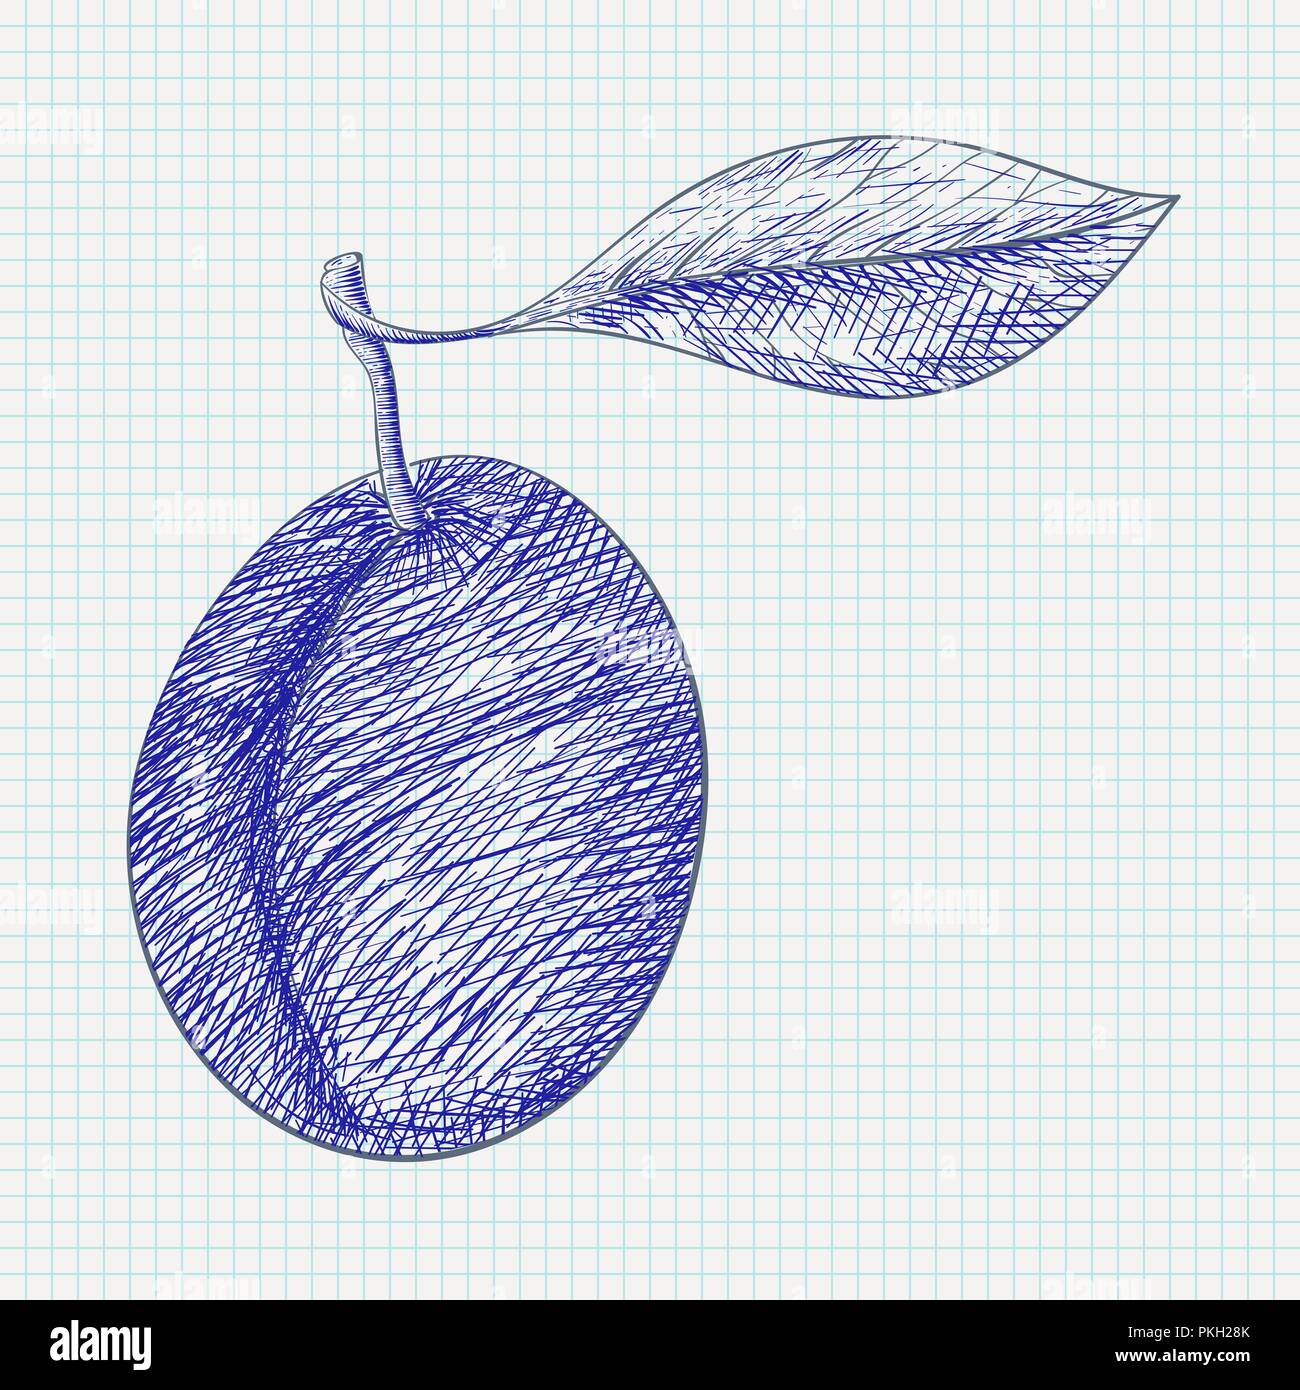 Plum. Hand drawn sketch on lined paper background Stock Vector